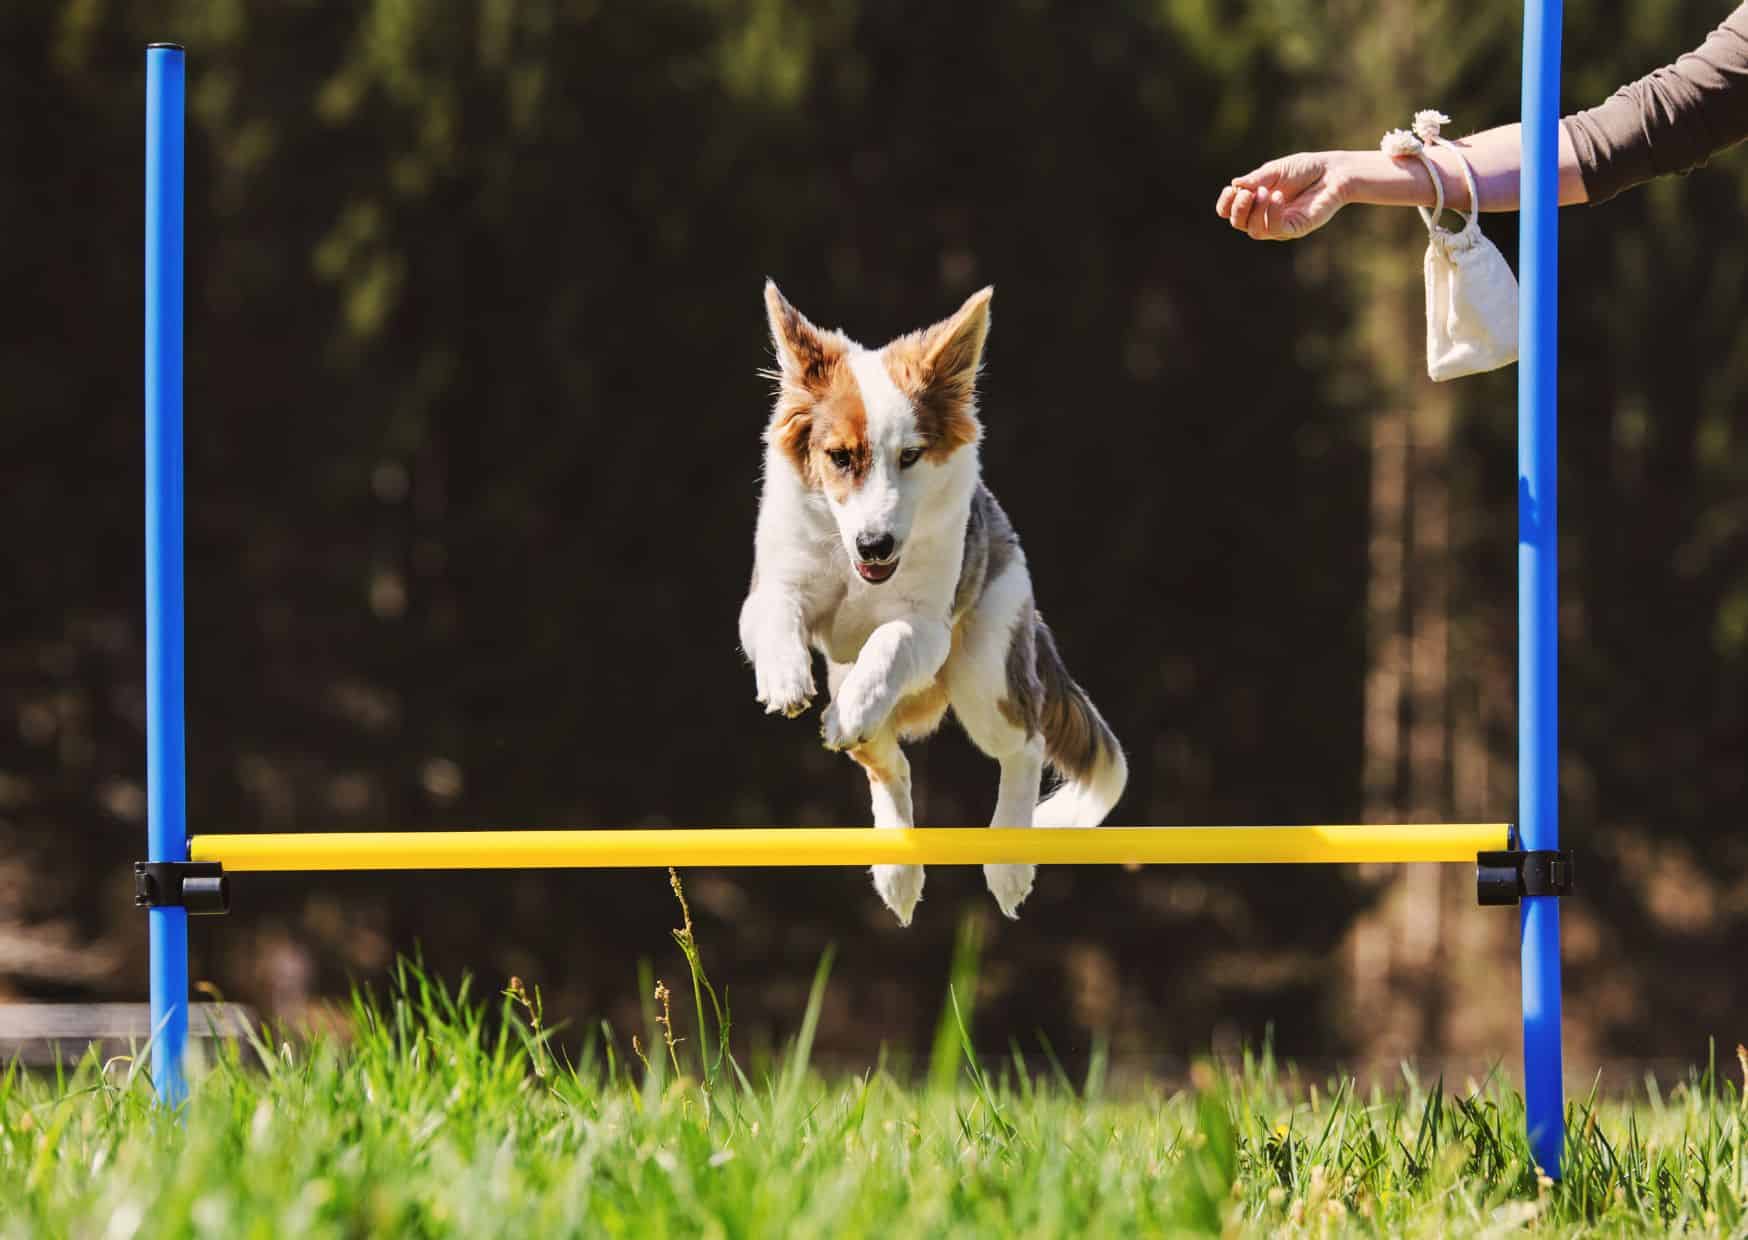 Obstacle Course Fun Setting Up A Canine Challenge - How To Celebrate Dogs Birthday | Pawcool ™